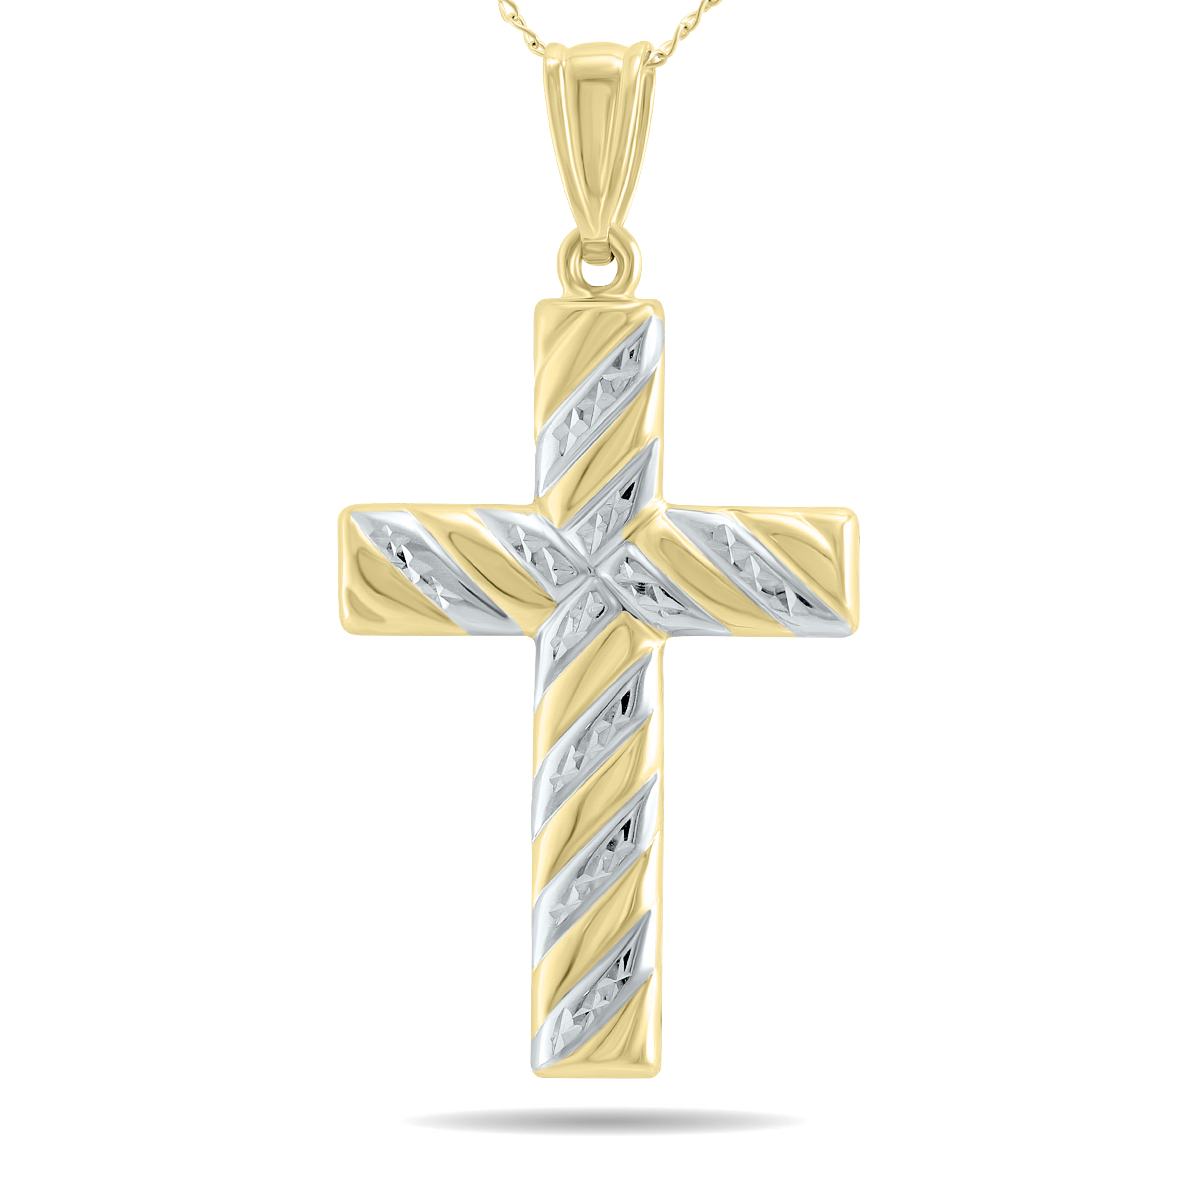 10K Gold Filled Etched Cross Pendant With White Rhodium Polish Accents